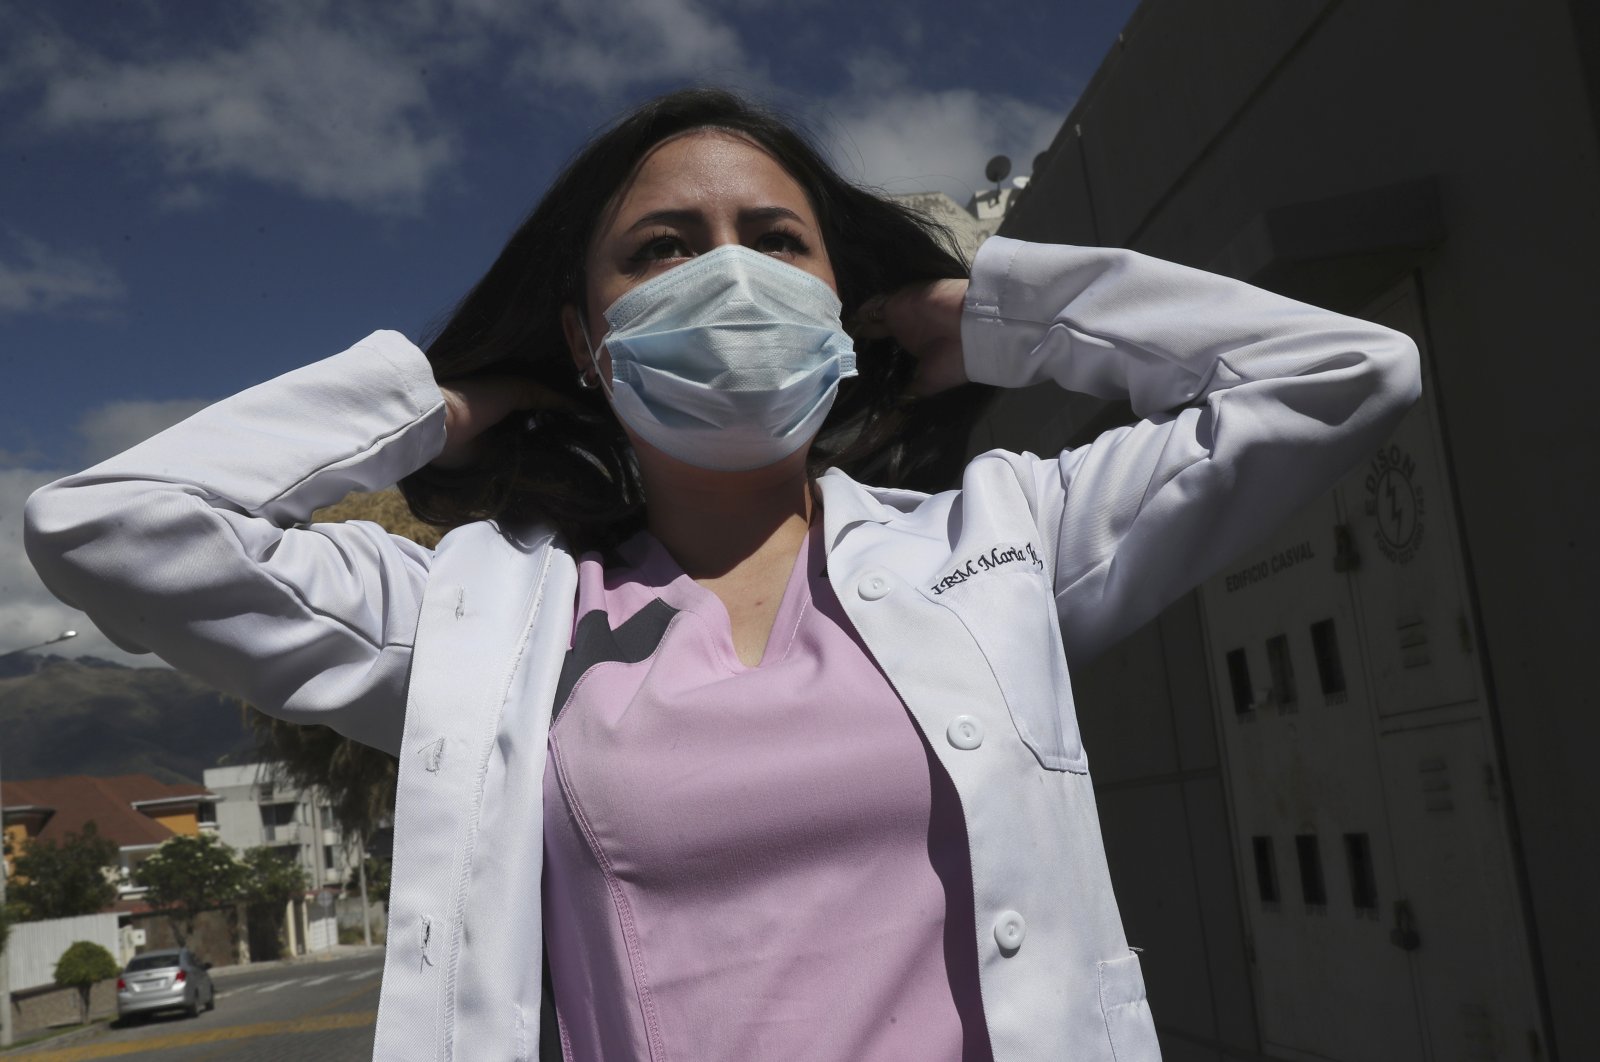 Dr. Maria Jose Casco, 24, adjusts her hair as she walks near her home in Quito, Ecuador, Aug. 5, 2020. A newly qualified doctor, Maria has not found work after graduating in Ecuador in April. (AP Photo)